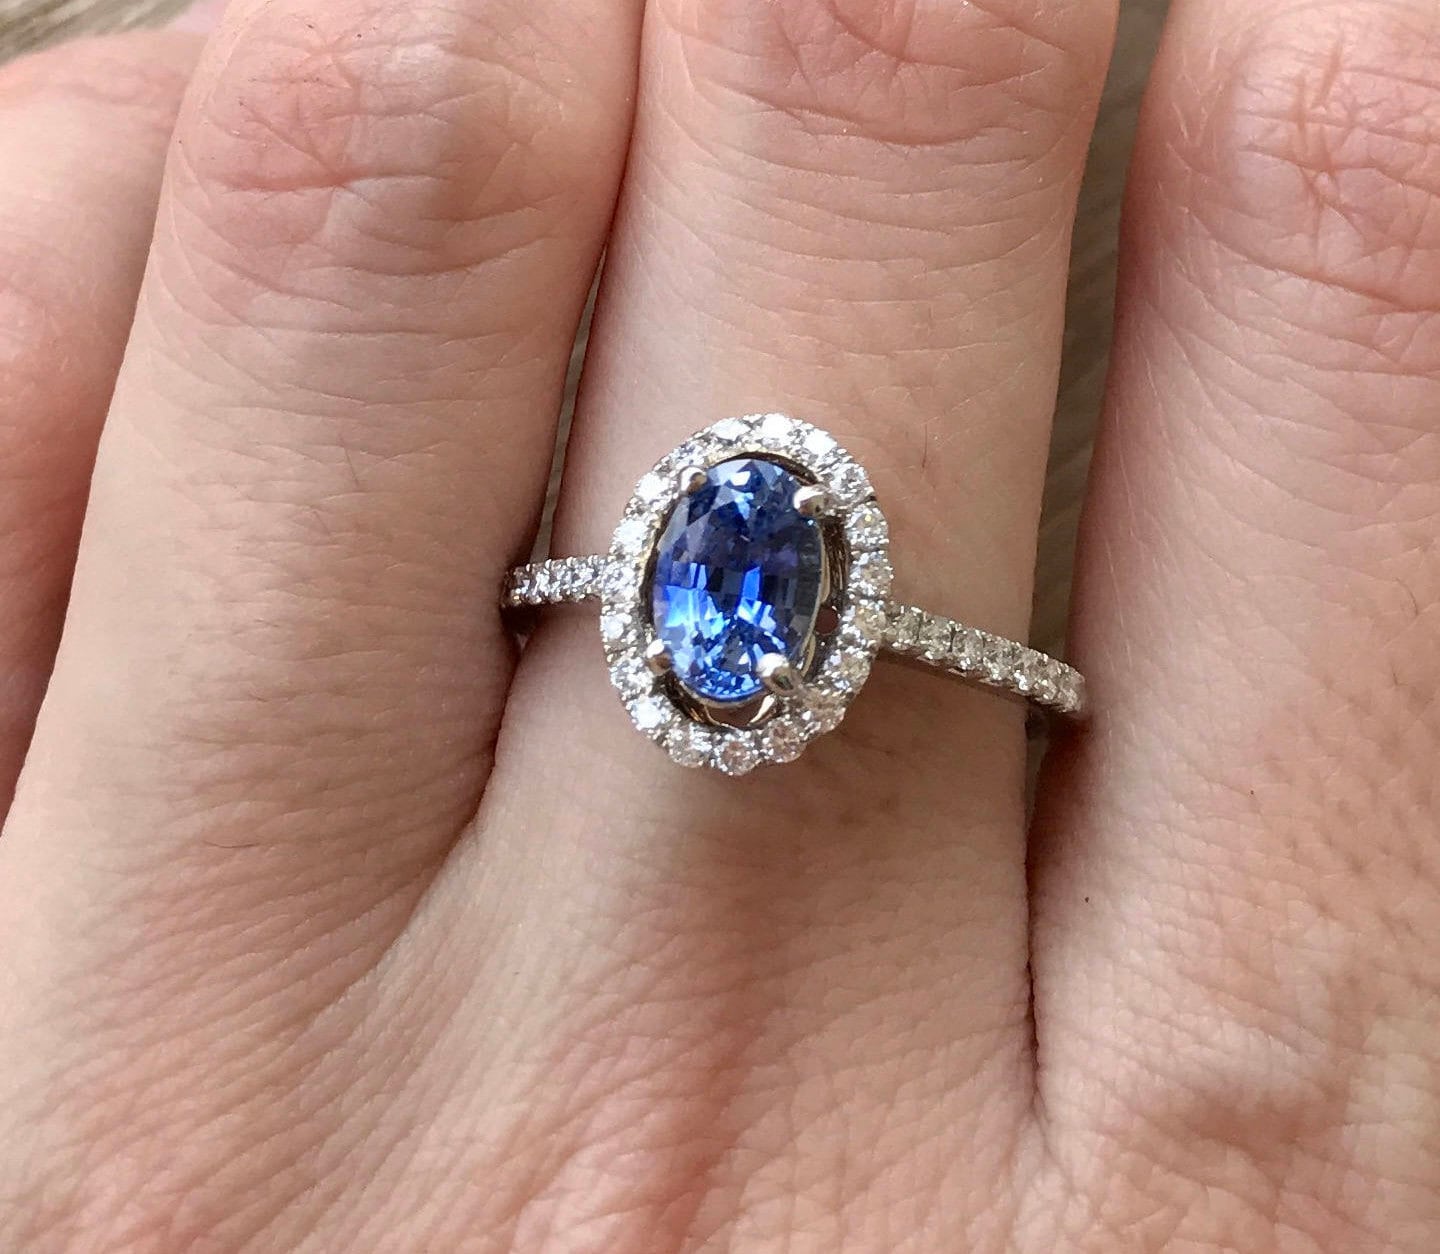 1.13ct Certified Cornflower Blue Sapphire Oval Engagement | Etsy 